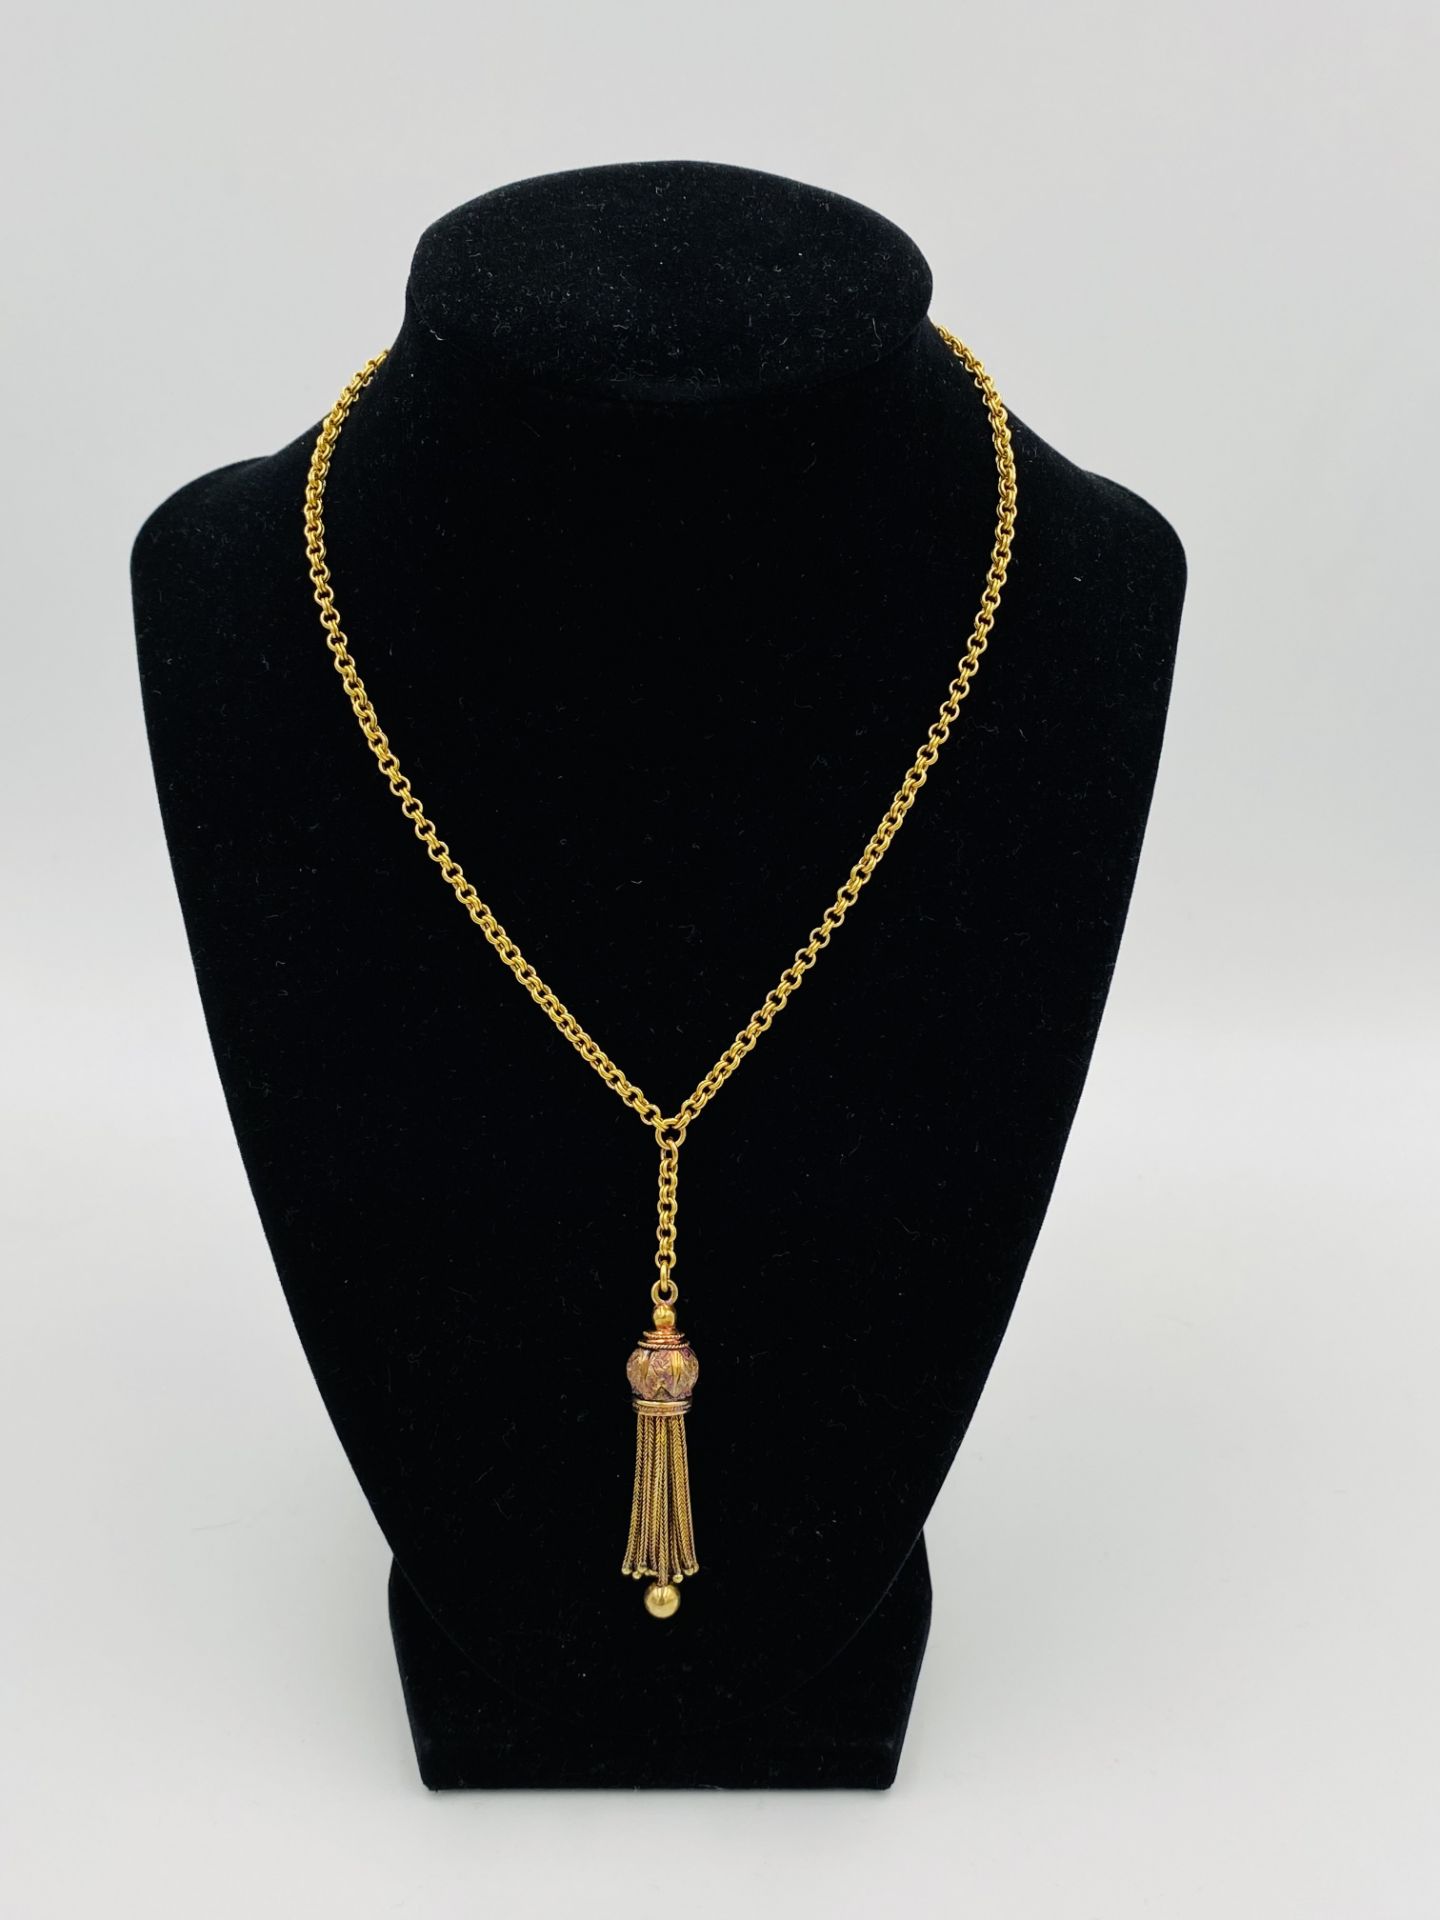 9ct gold necklace with 18ct gold tassel